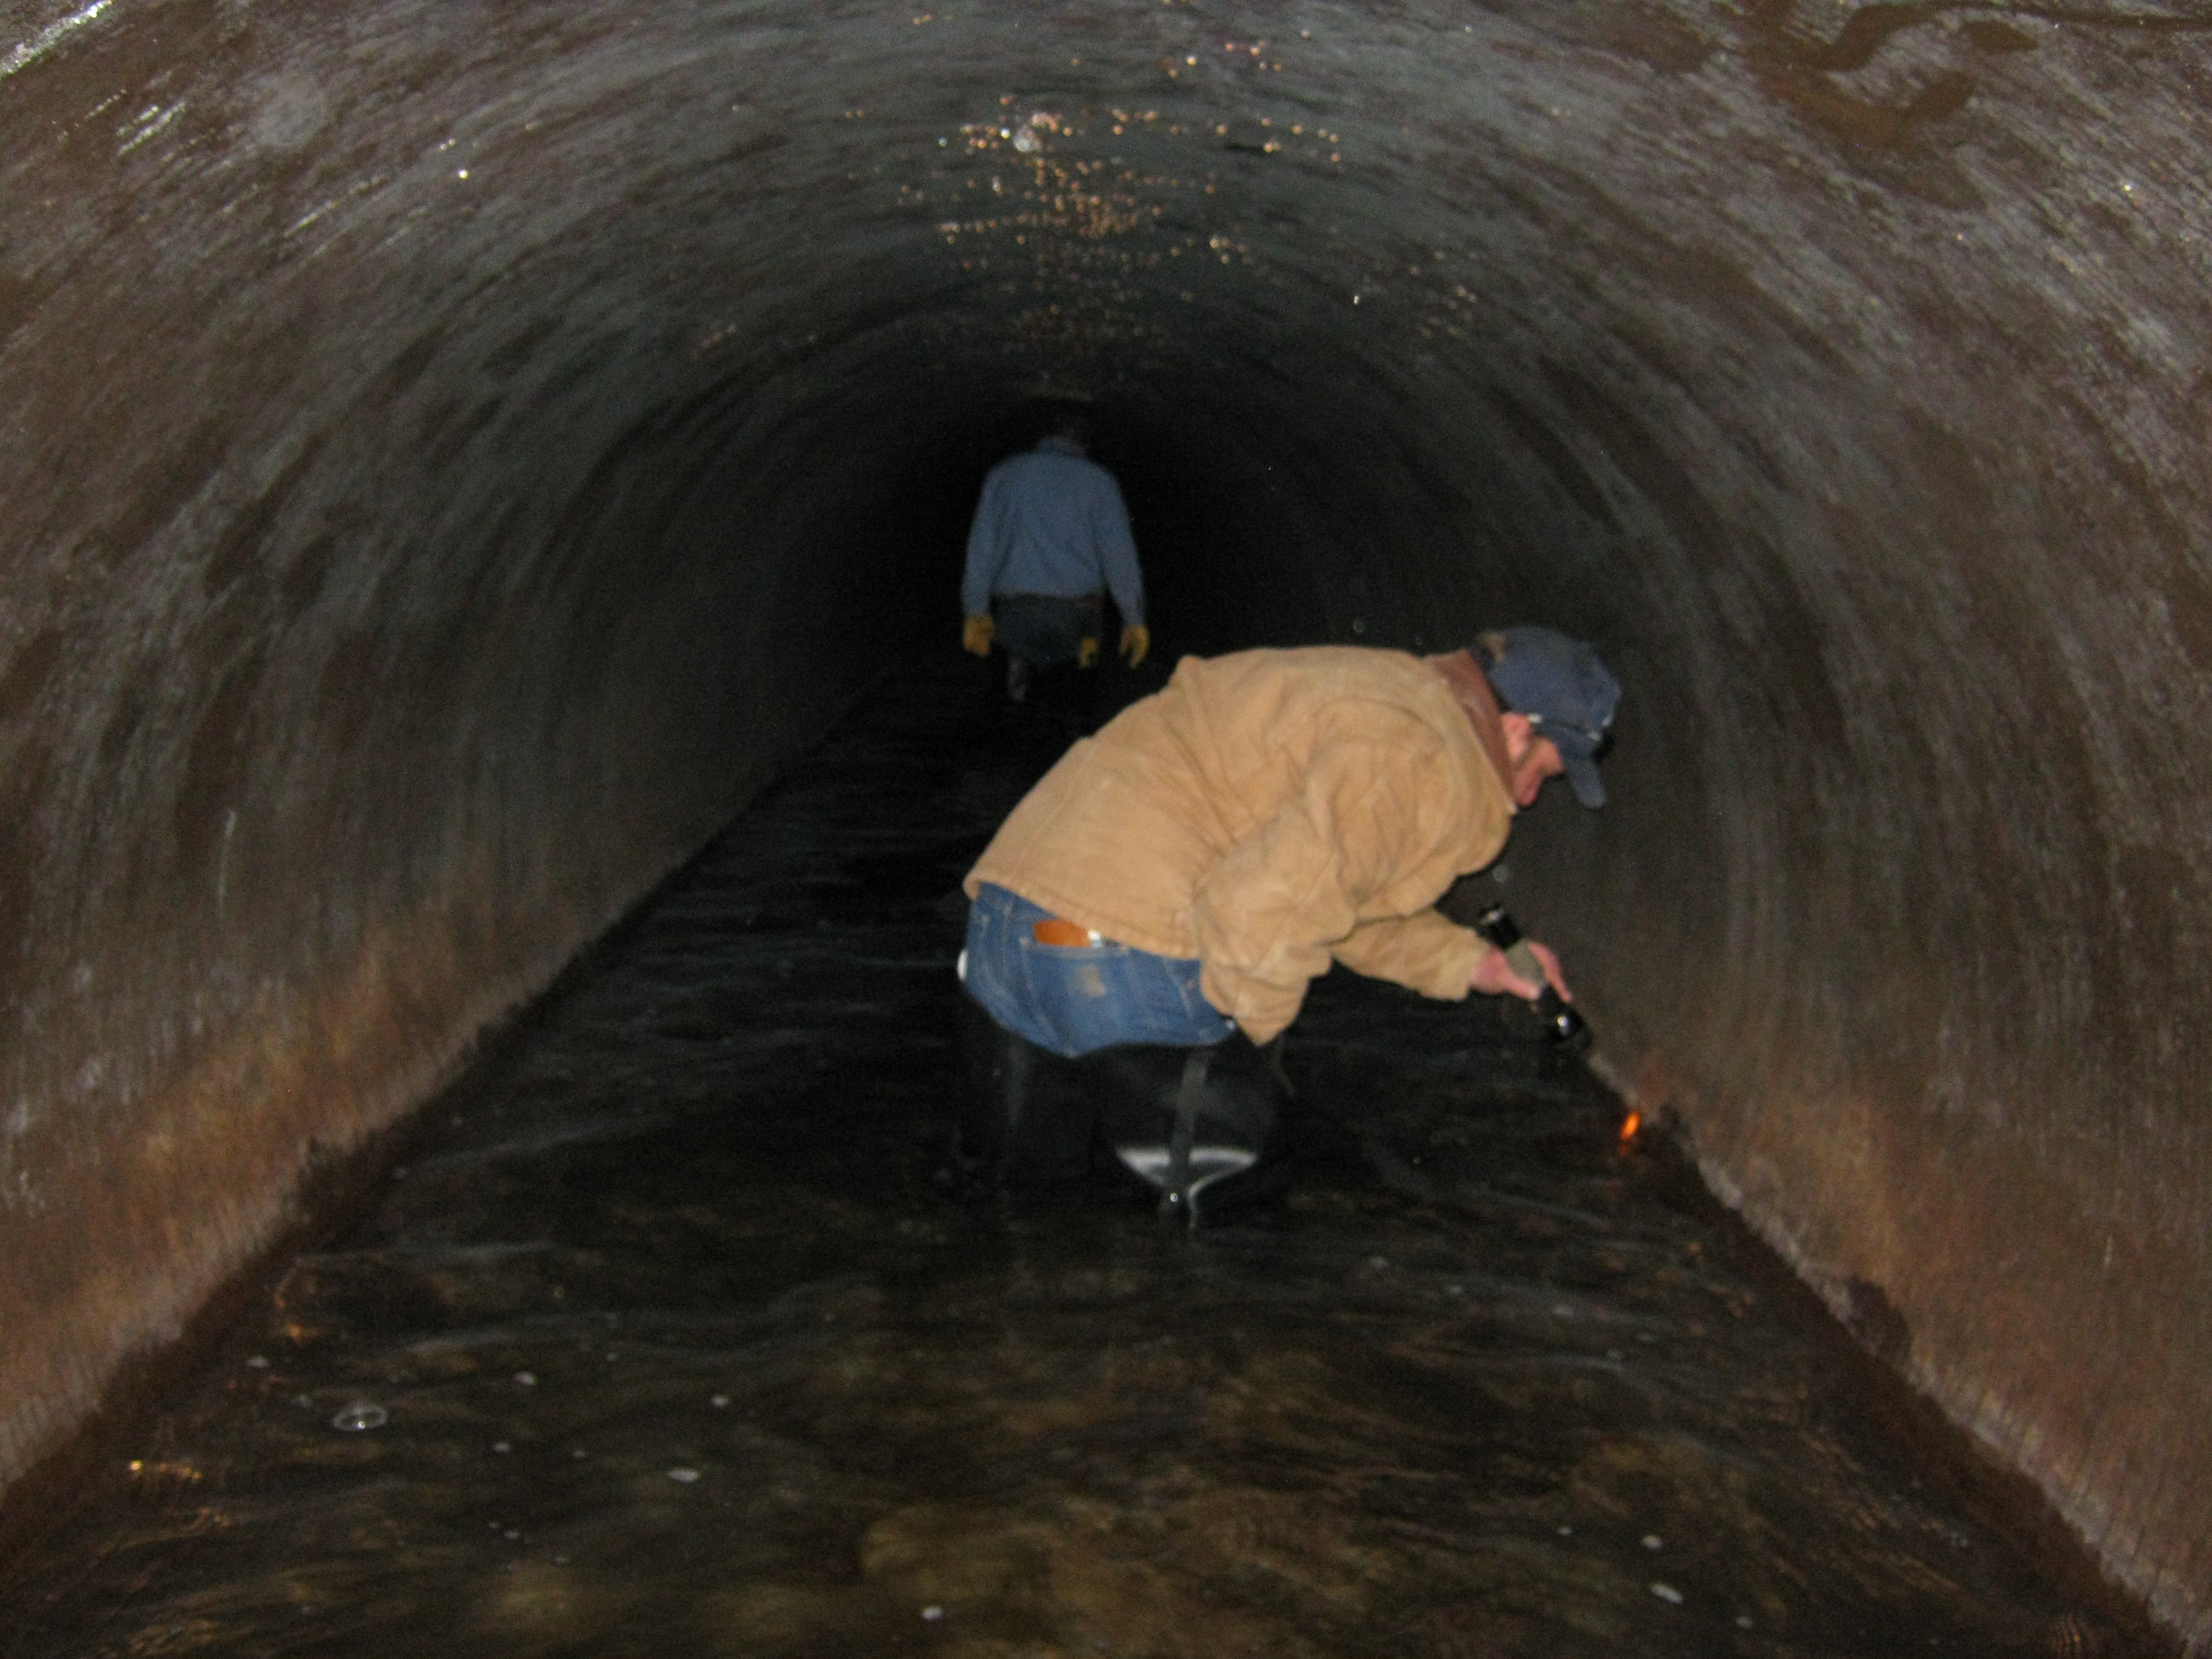 Scientist crouching in a drained, large water supply pipe looking for juvenile or adult zebra mussels along the pipe walls.   Another scientist is visible in the background walking further down the pipe.